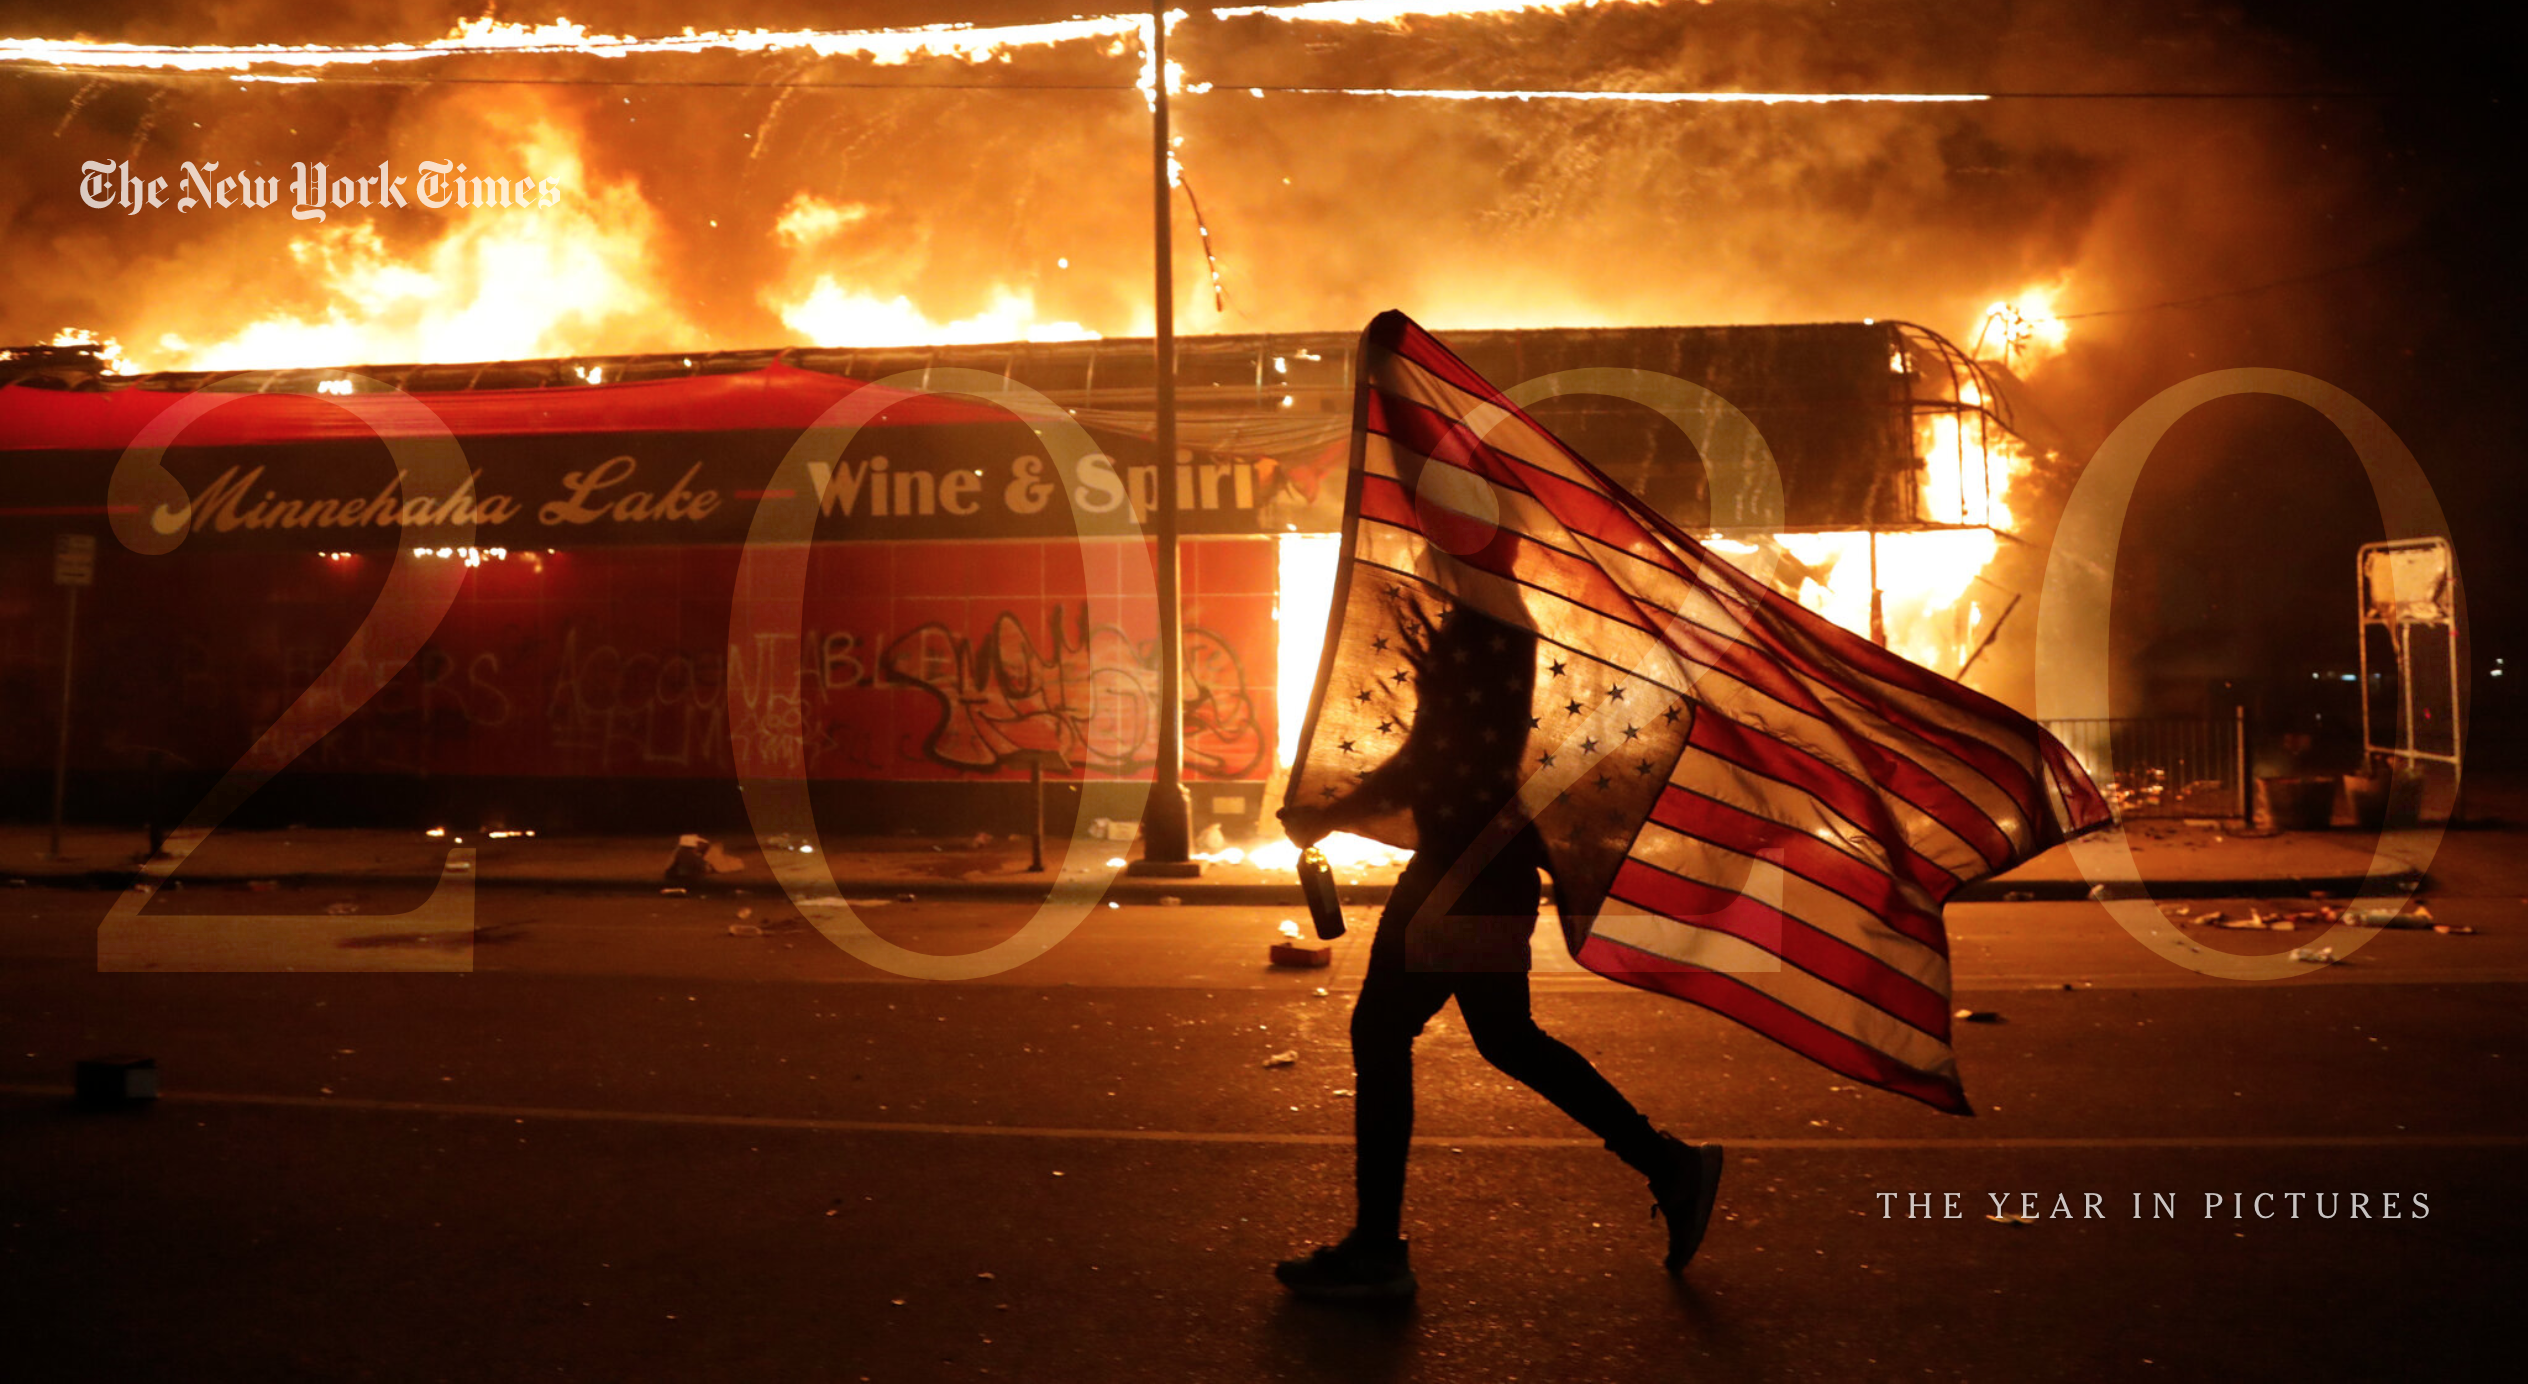 Screenshot of the New York Times 2020 Year in Pictures, showing a person holding an upside-down American flag against the backdrop of a burning building.